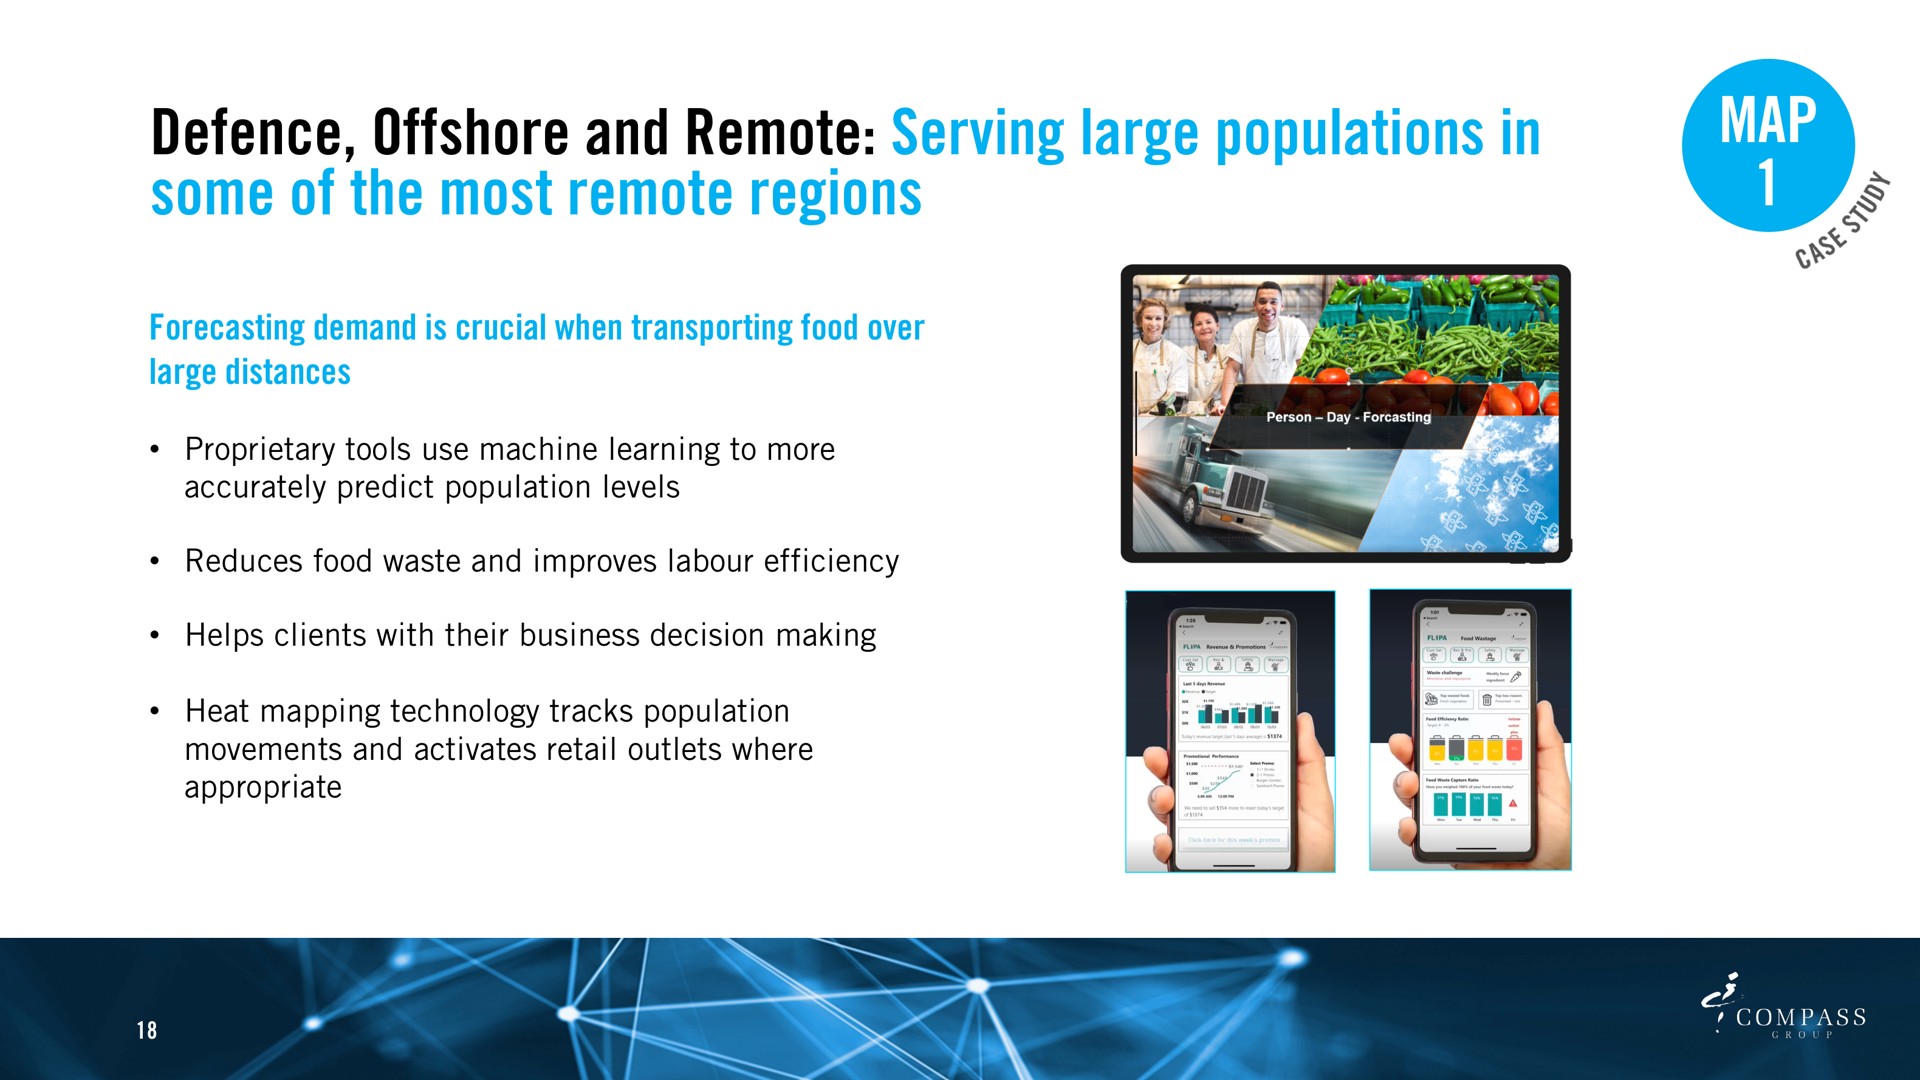 defence offshore and remote serving large populations in some of the most remote regions map | Compass Group